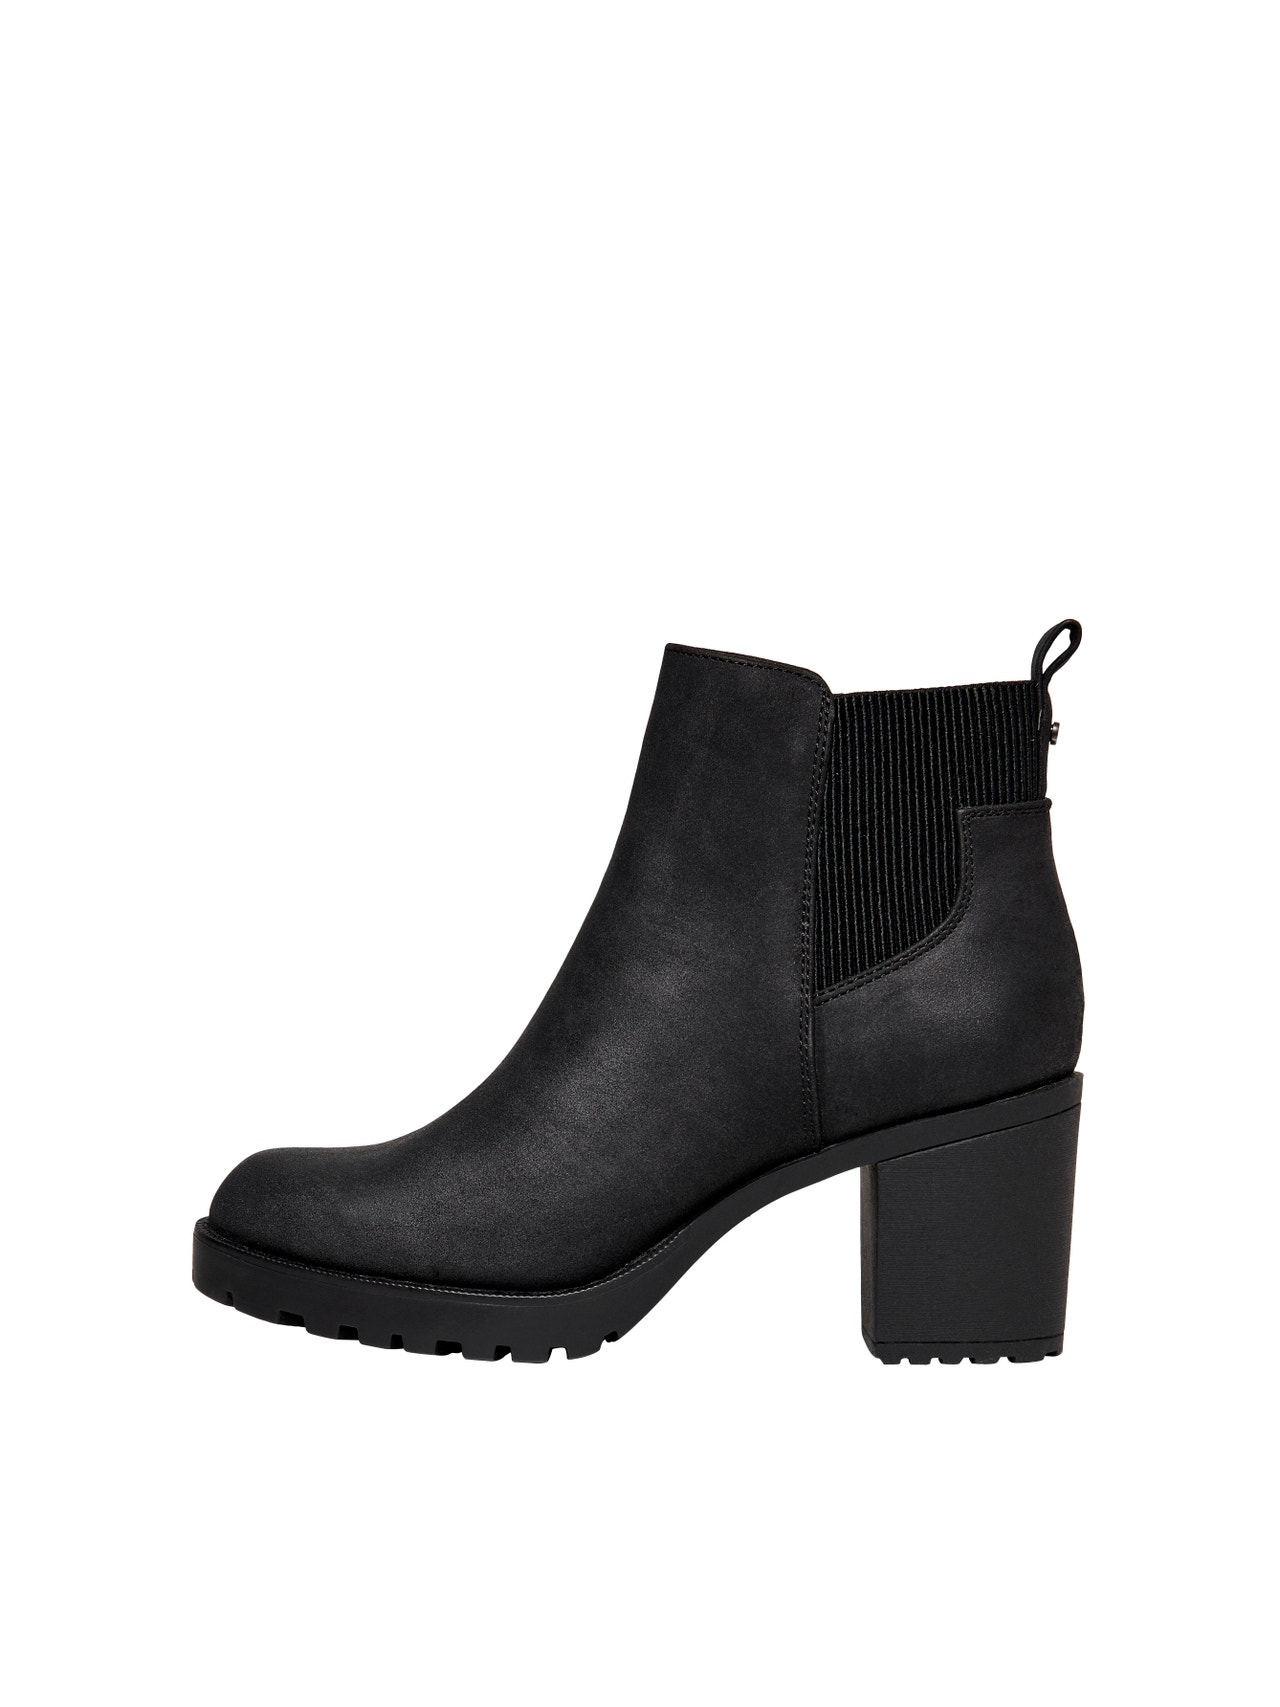 ONLY Heeled Boots -Black - 15184295